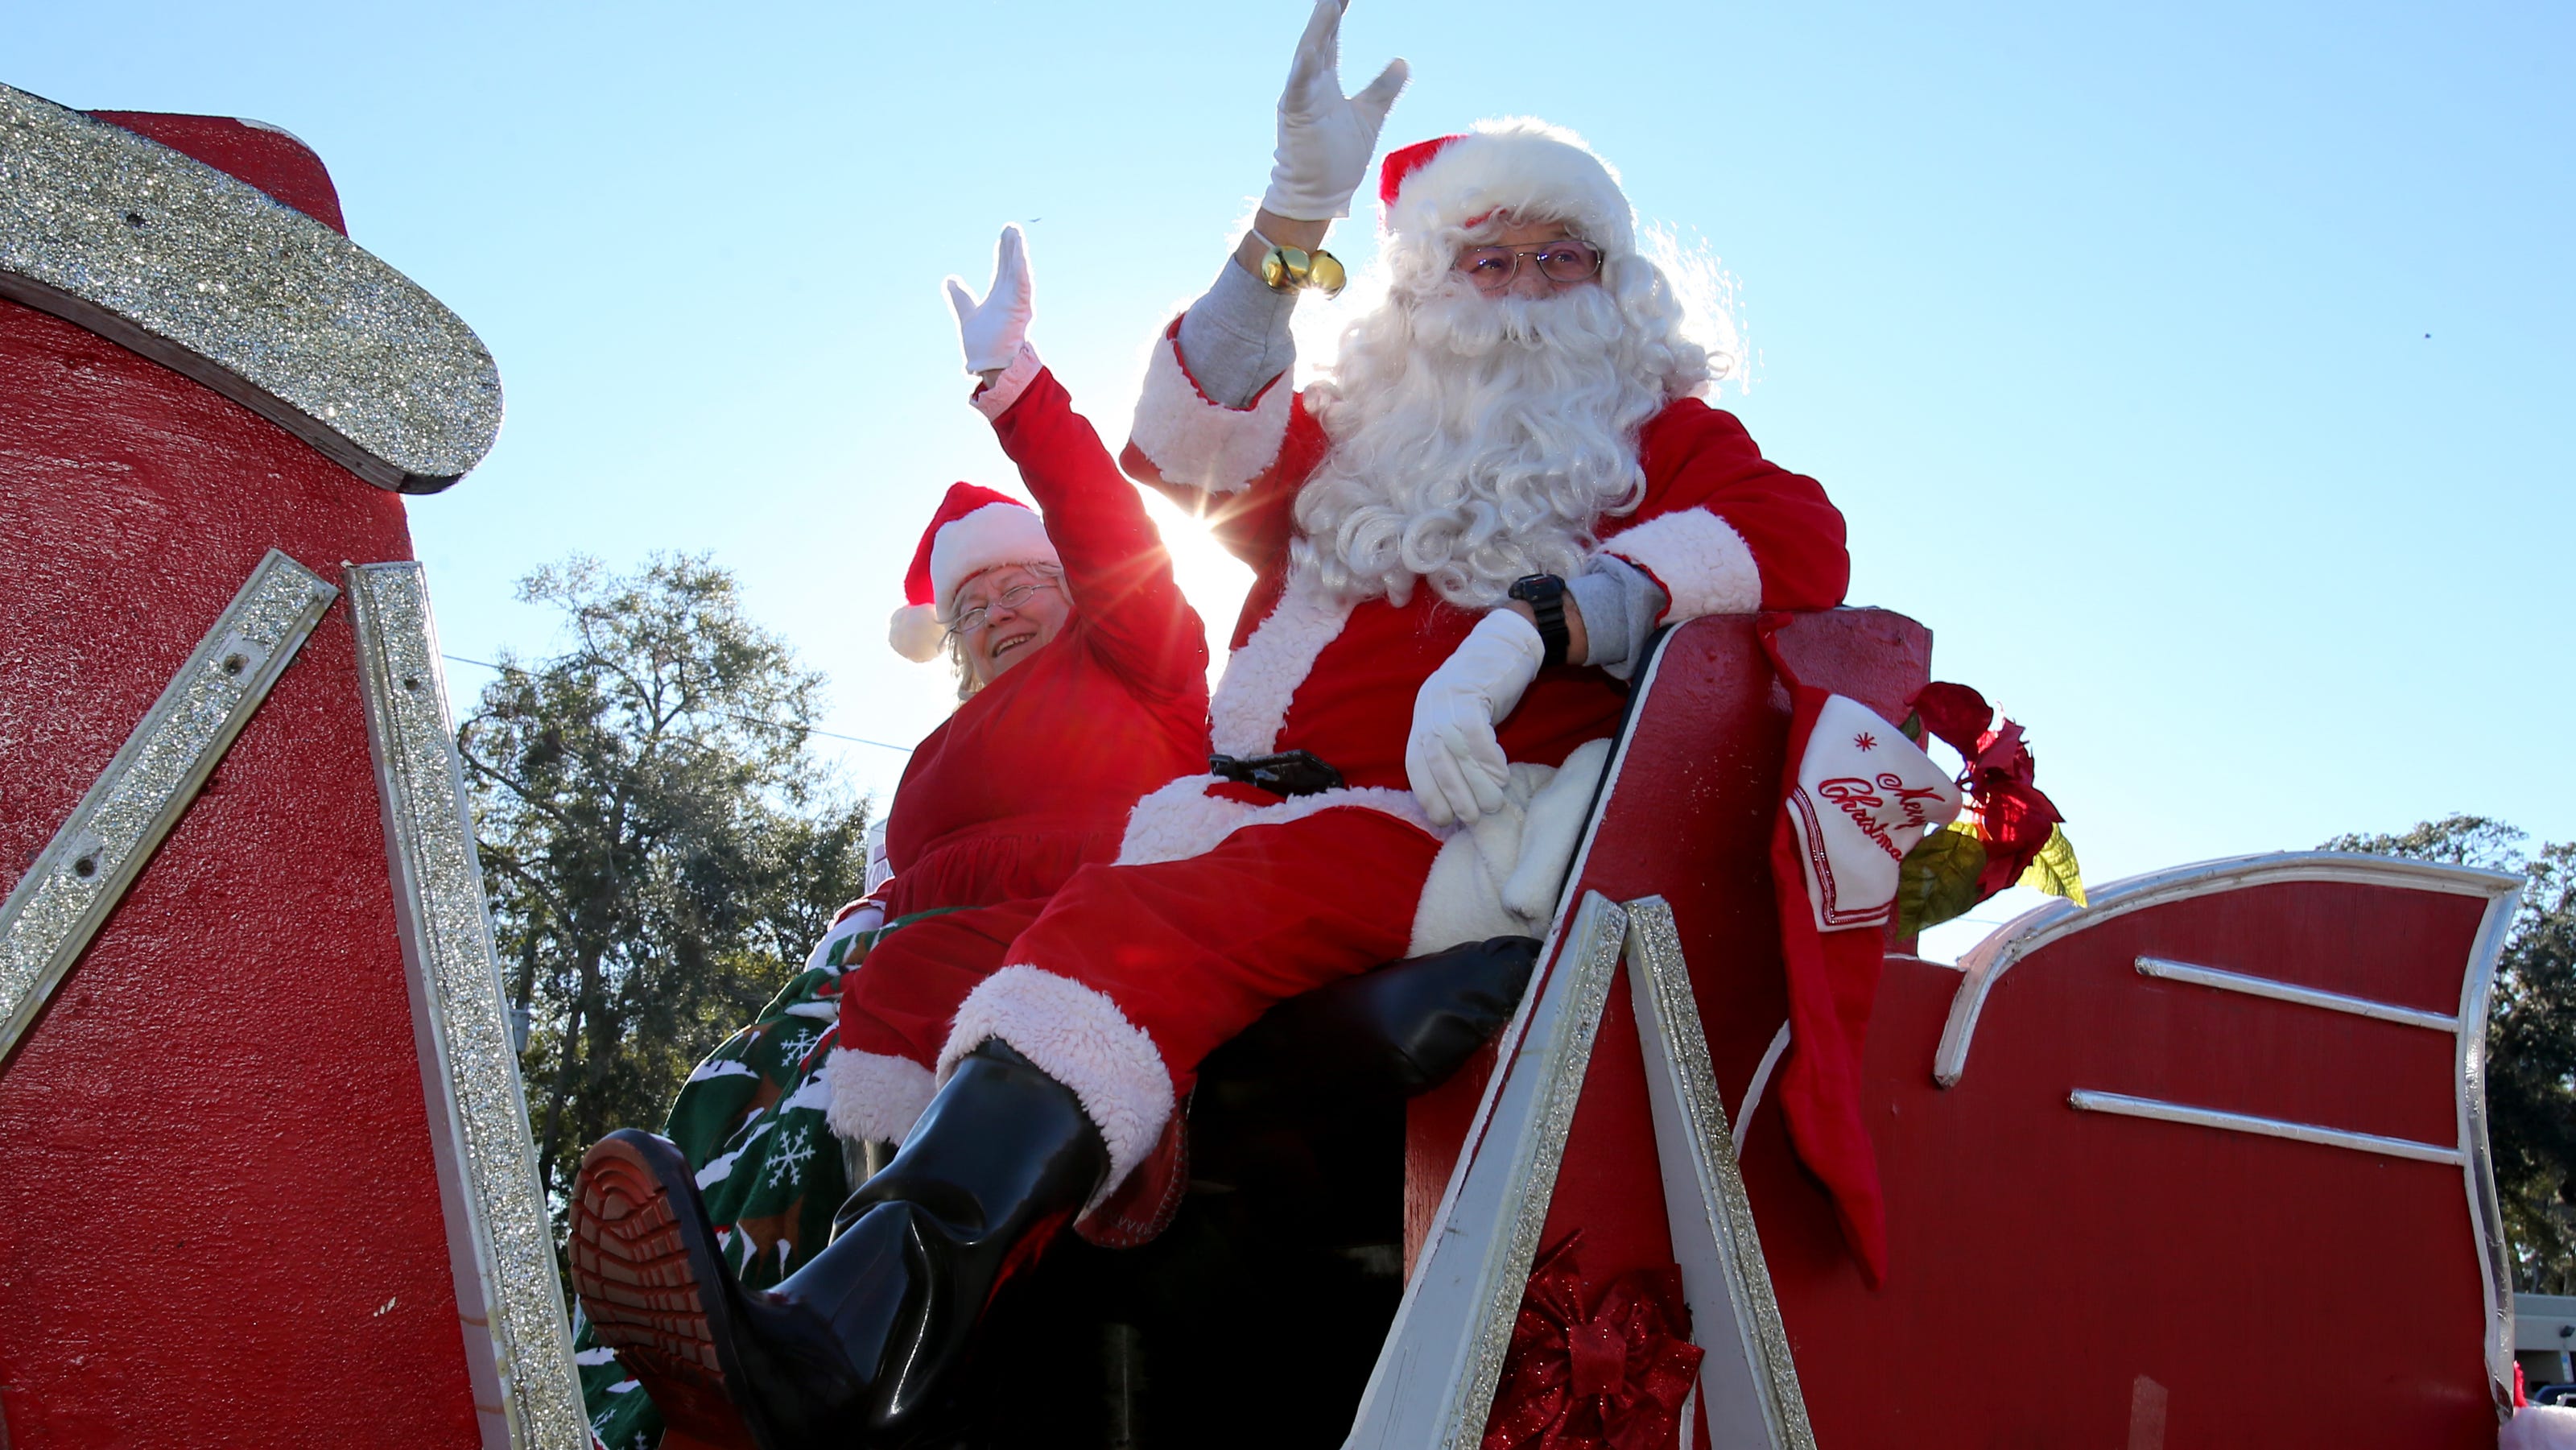 Belleview, Dunnellon Christmas parades still on